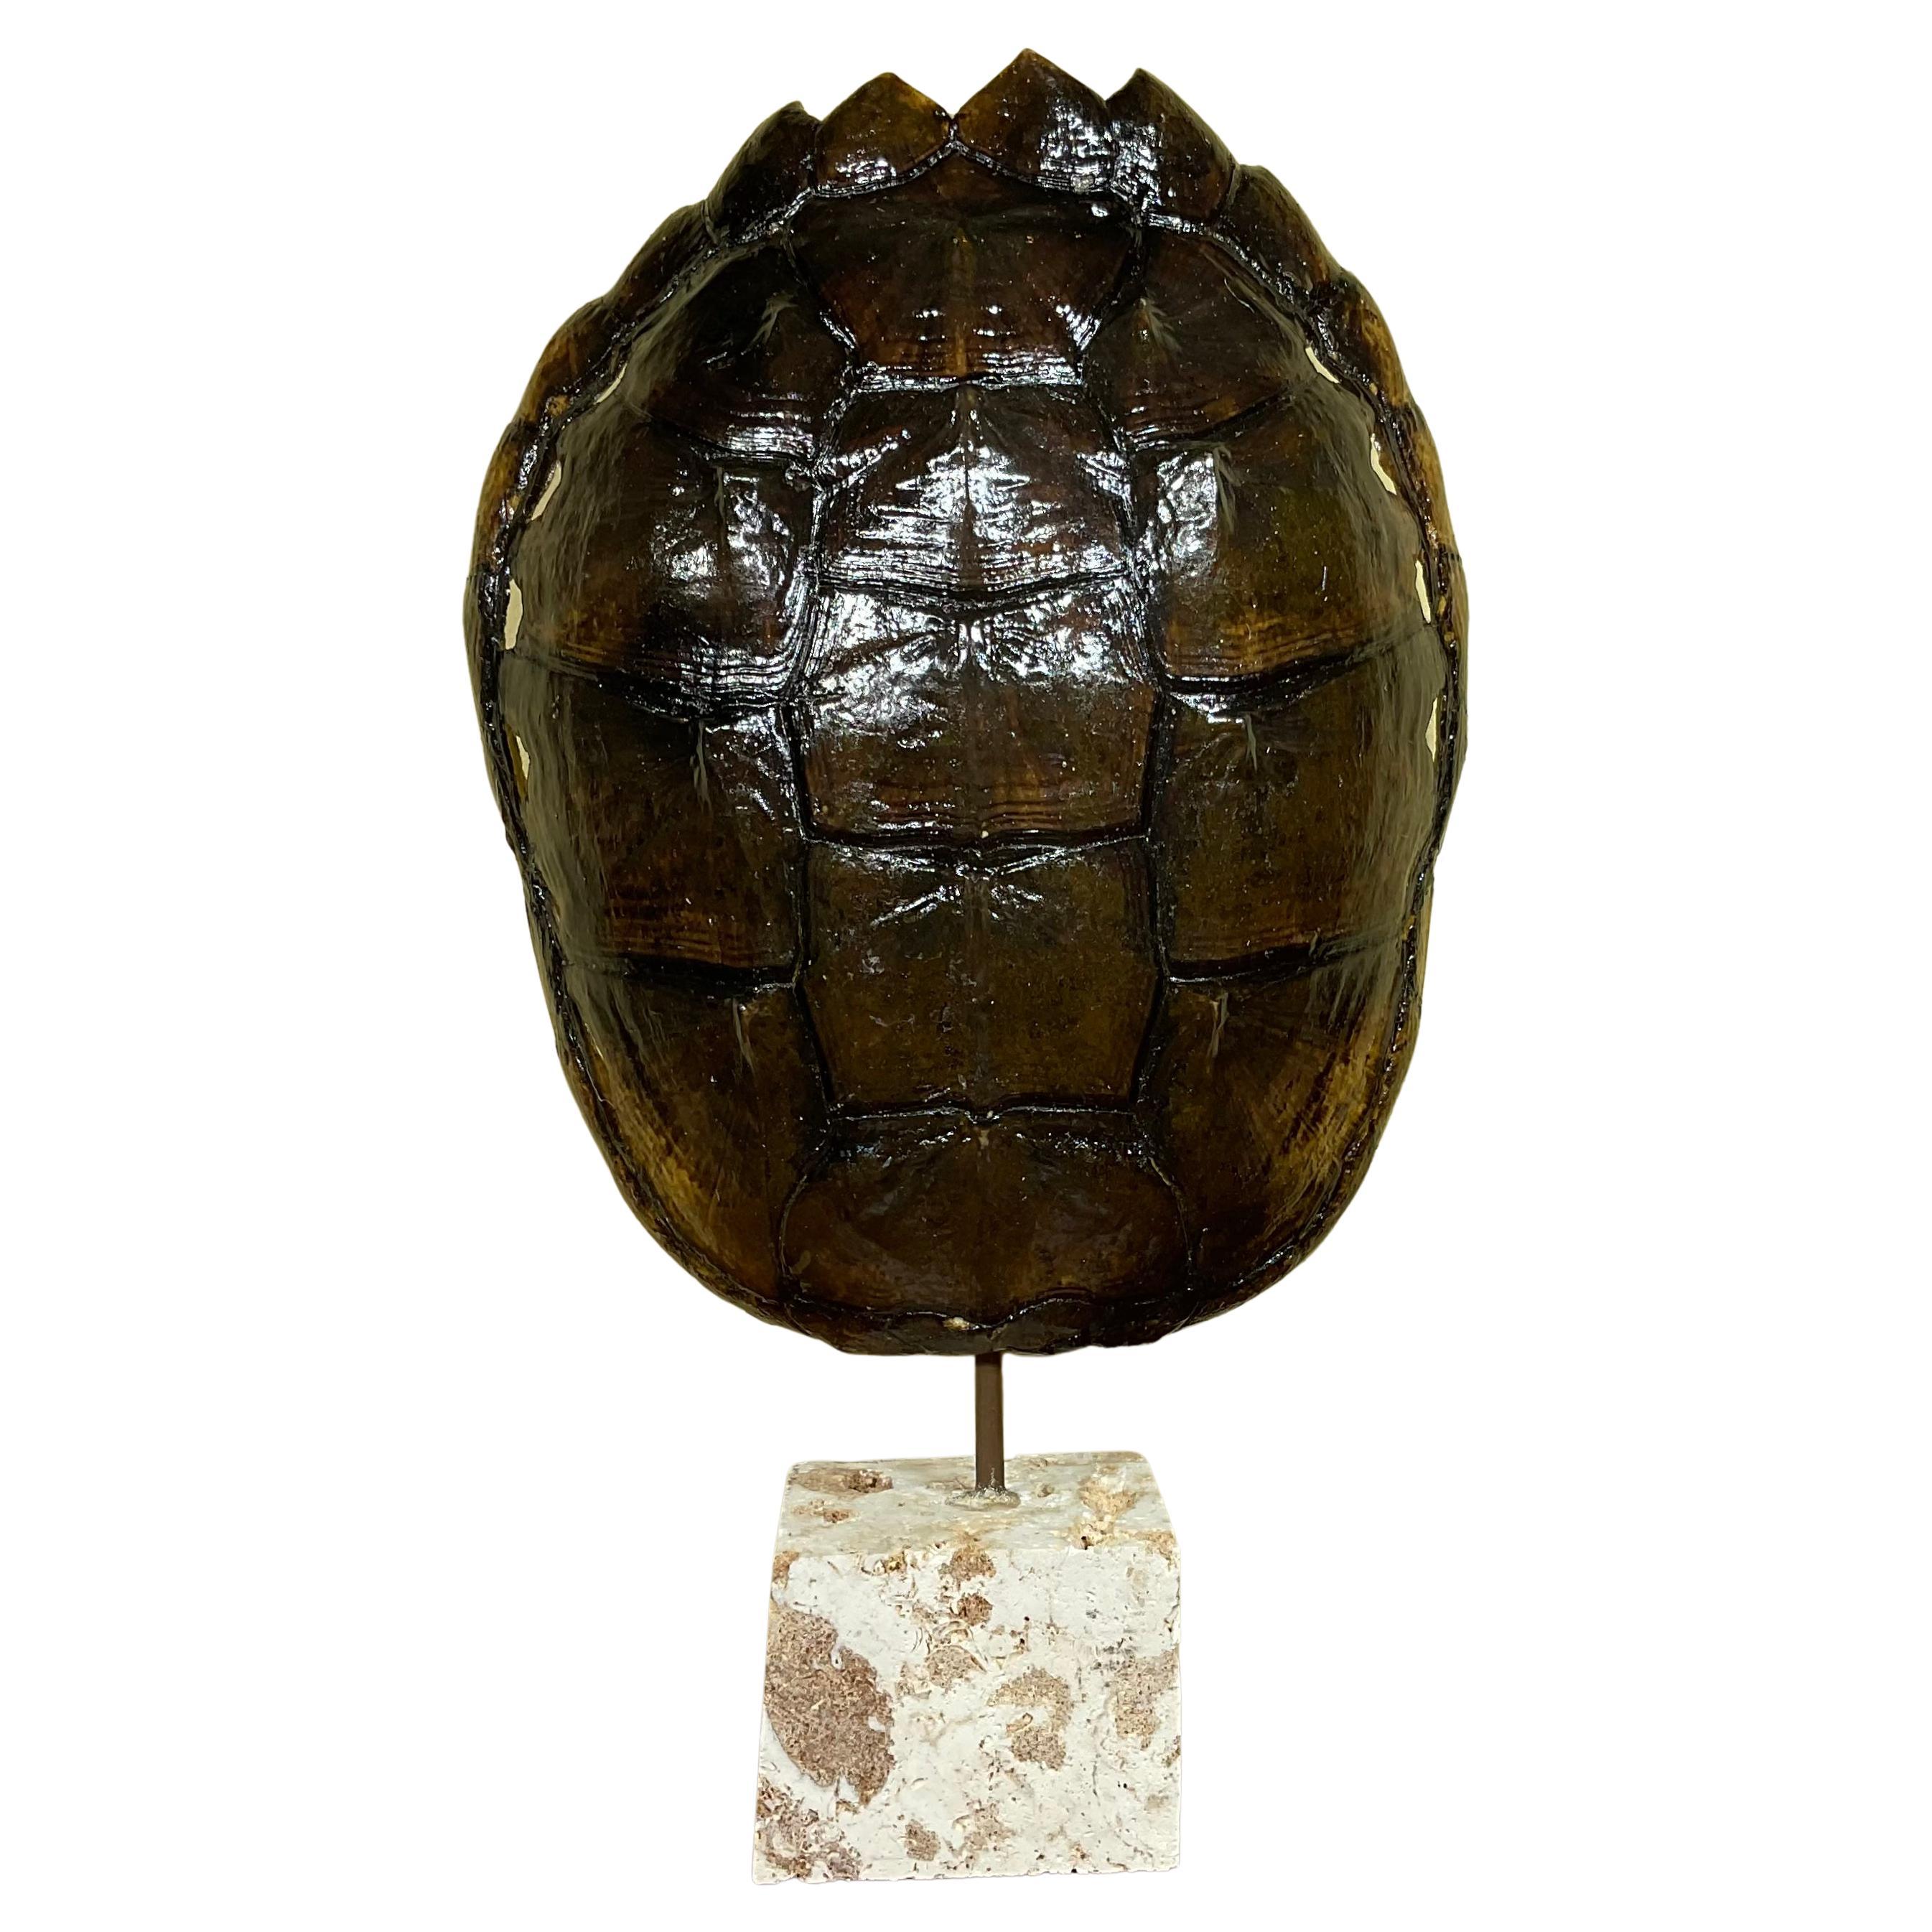 Genuine American Fresh Water Snapping Turtle Shell